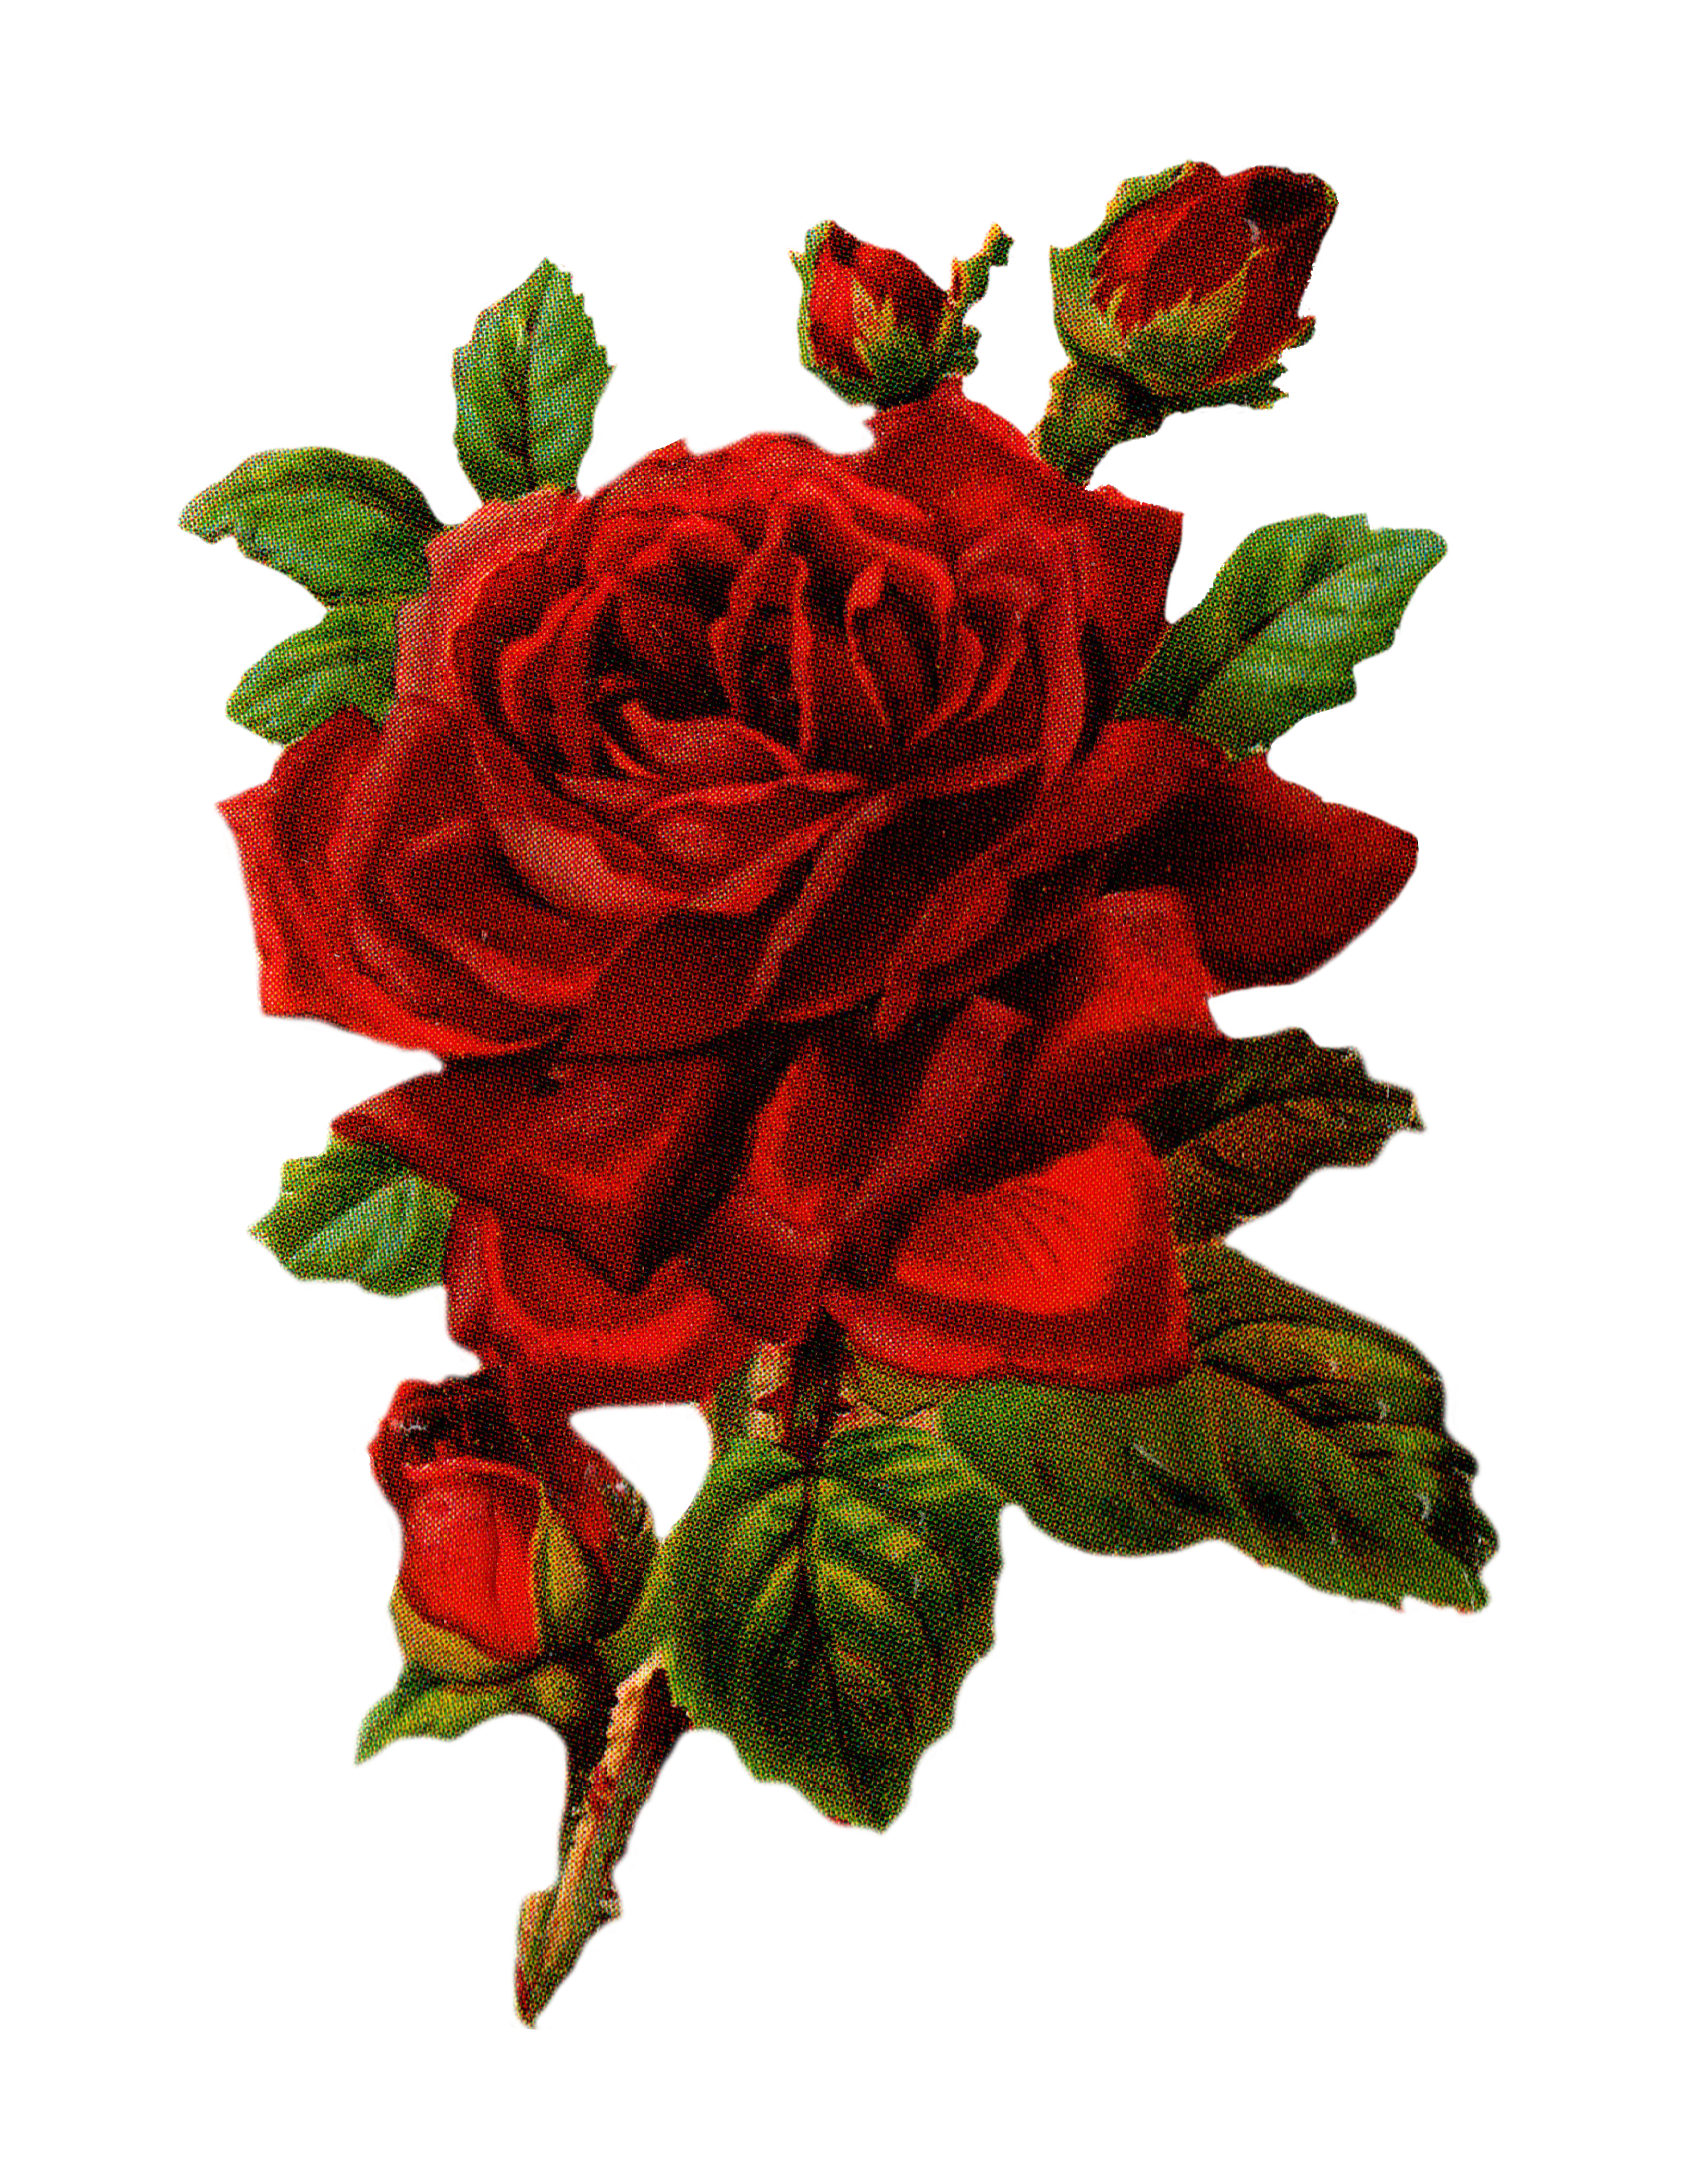 large rose image graphics for facebook whatsapp #40651